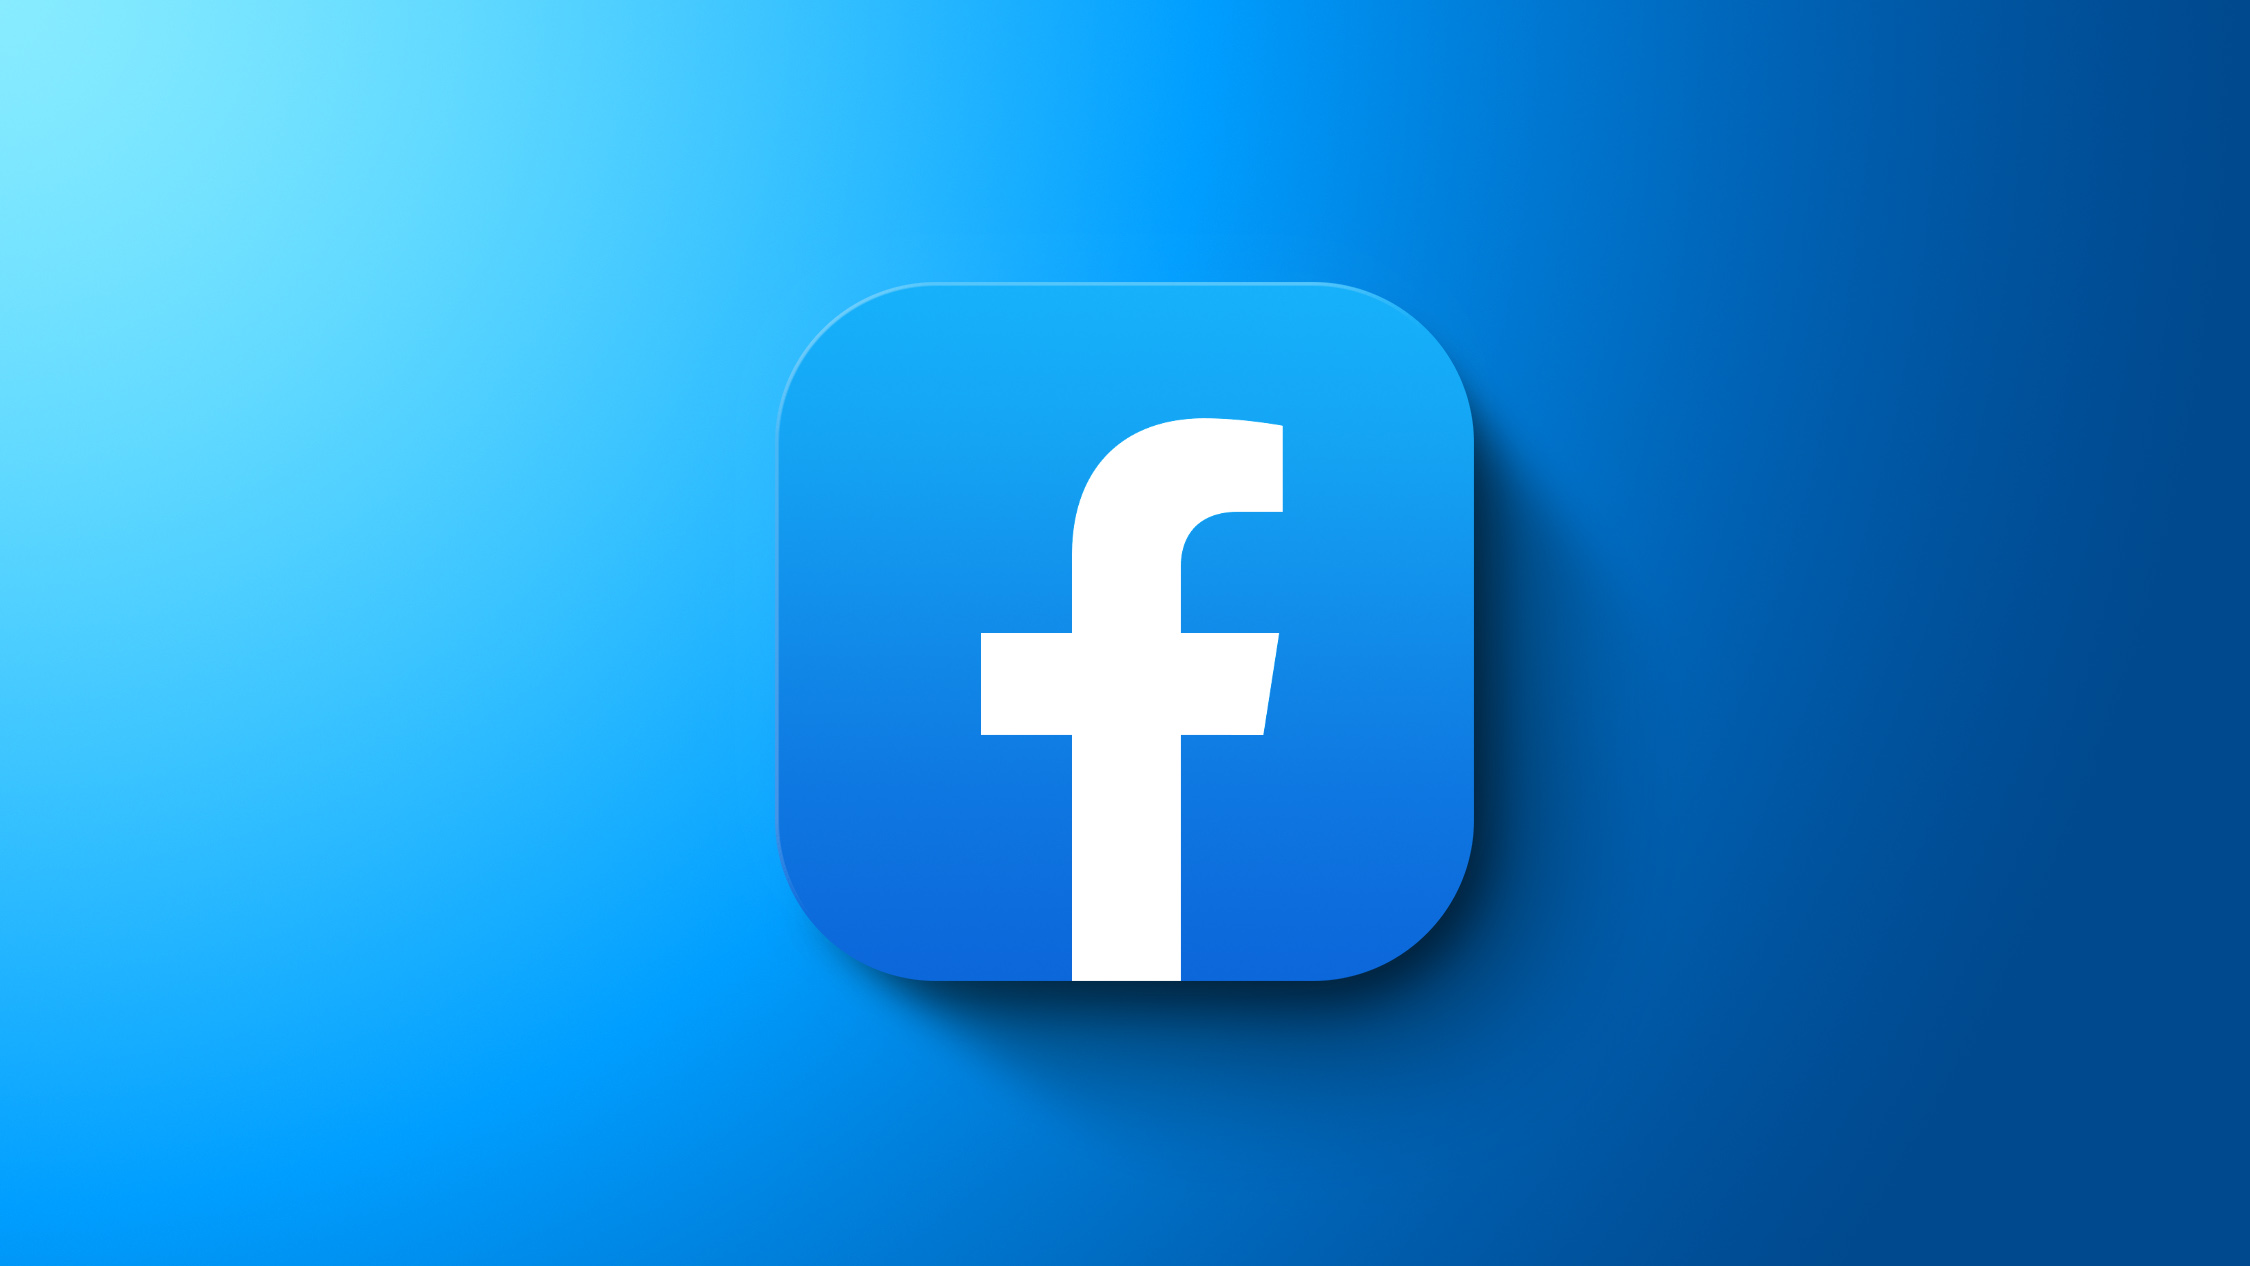 Facebook Accuses Apple of ‘Undercutting Others’ With App Store Guidelines on Boosted Posts